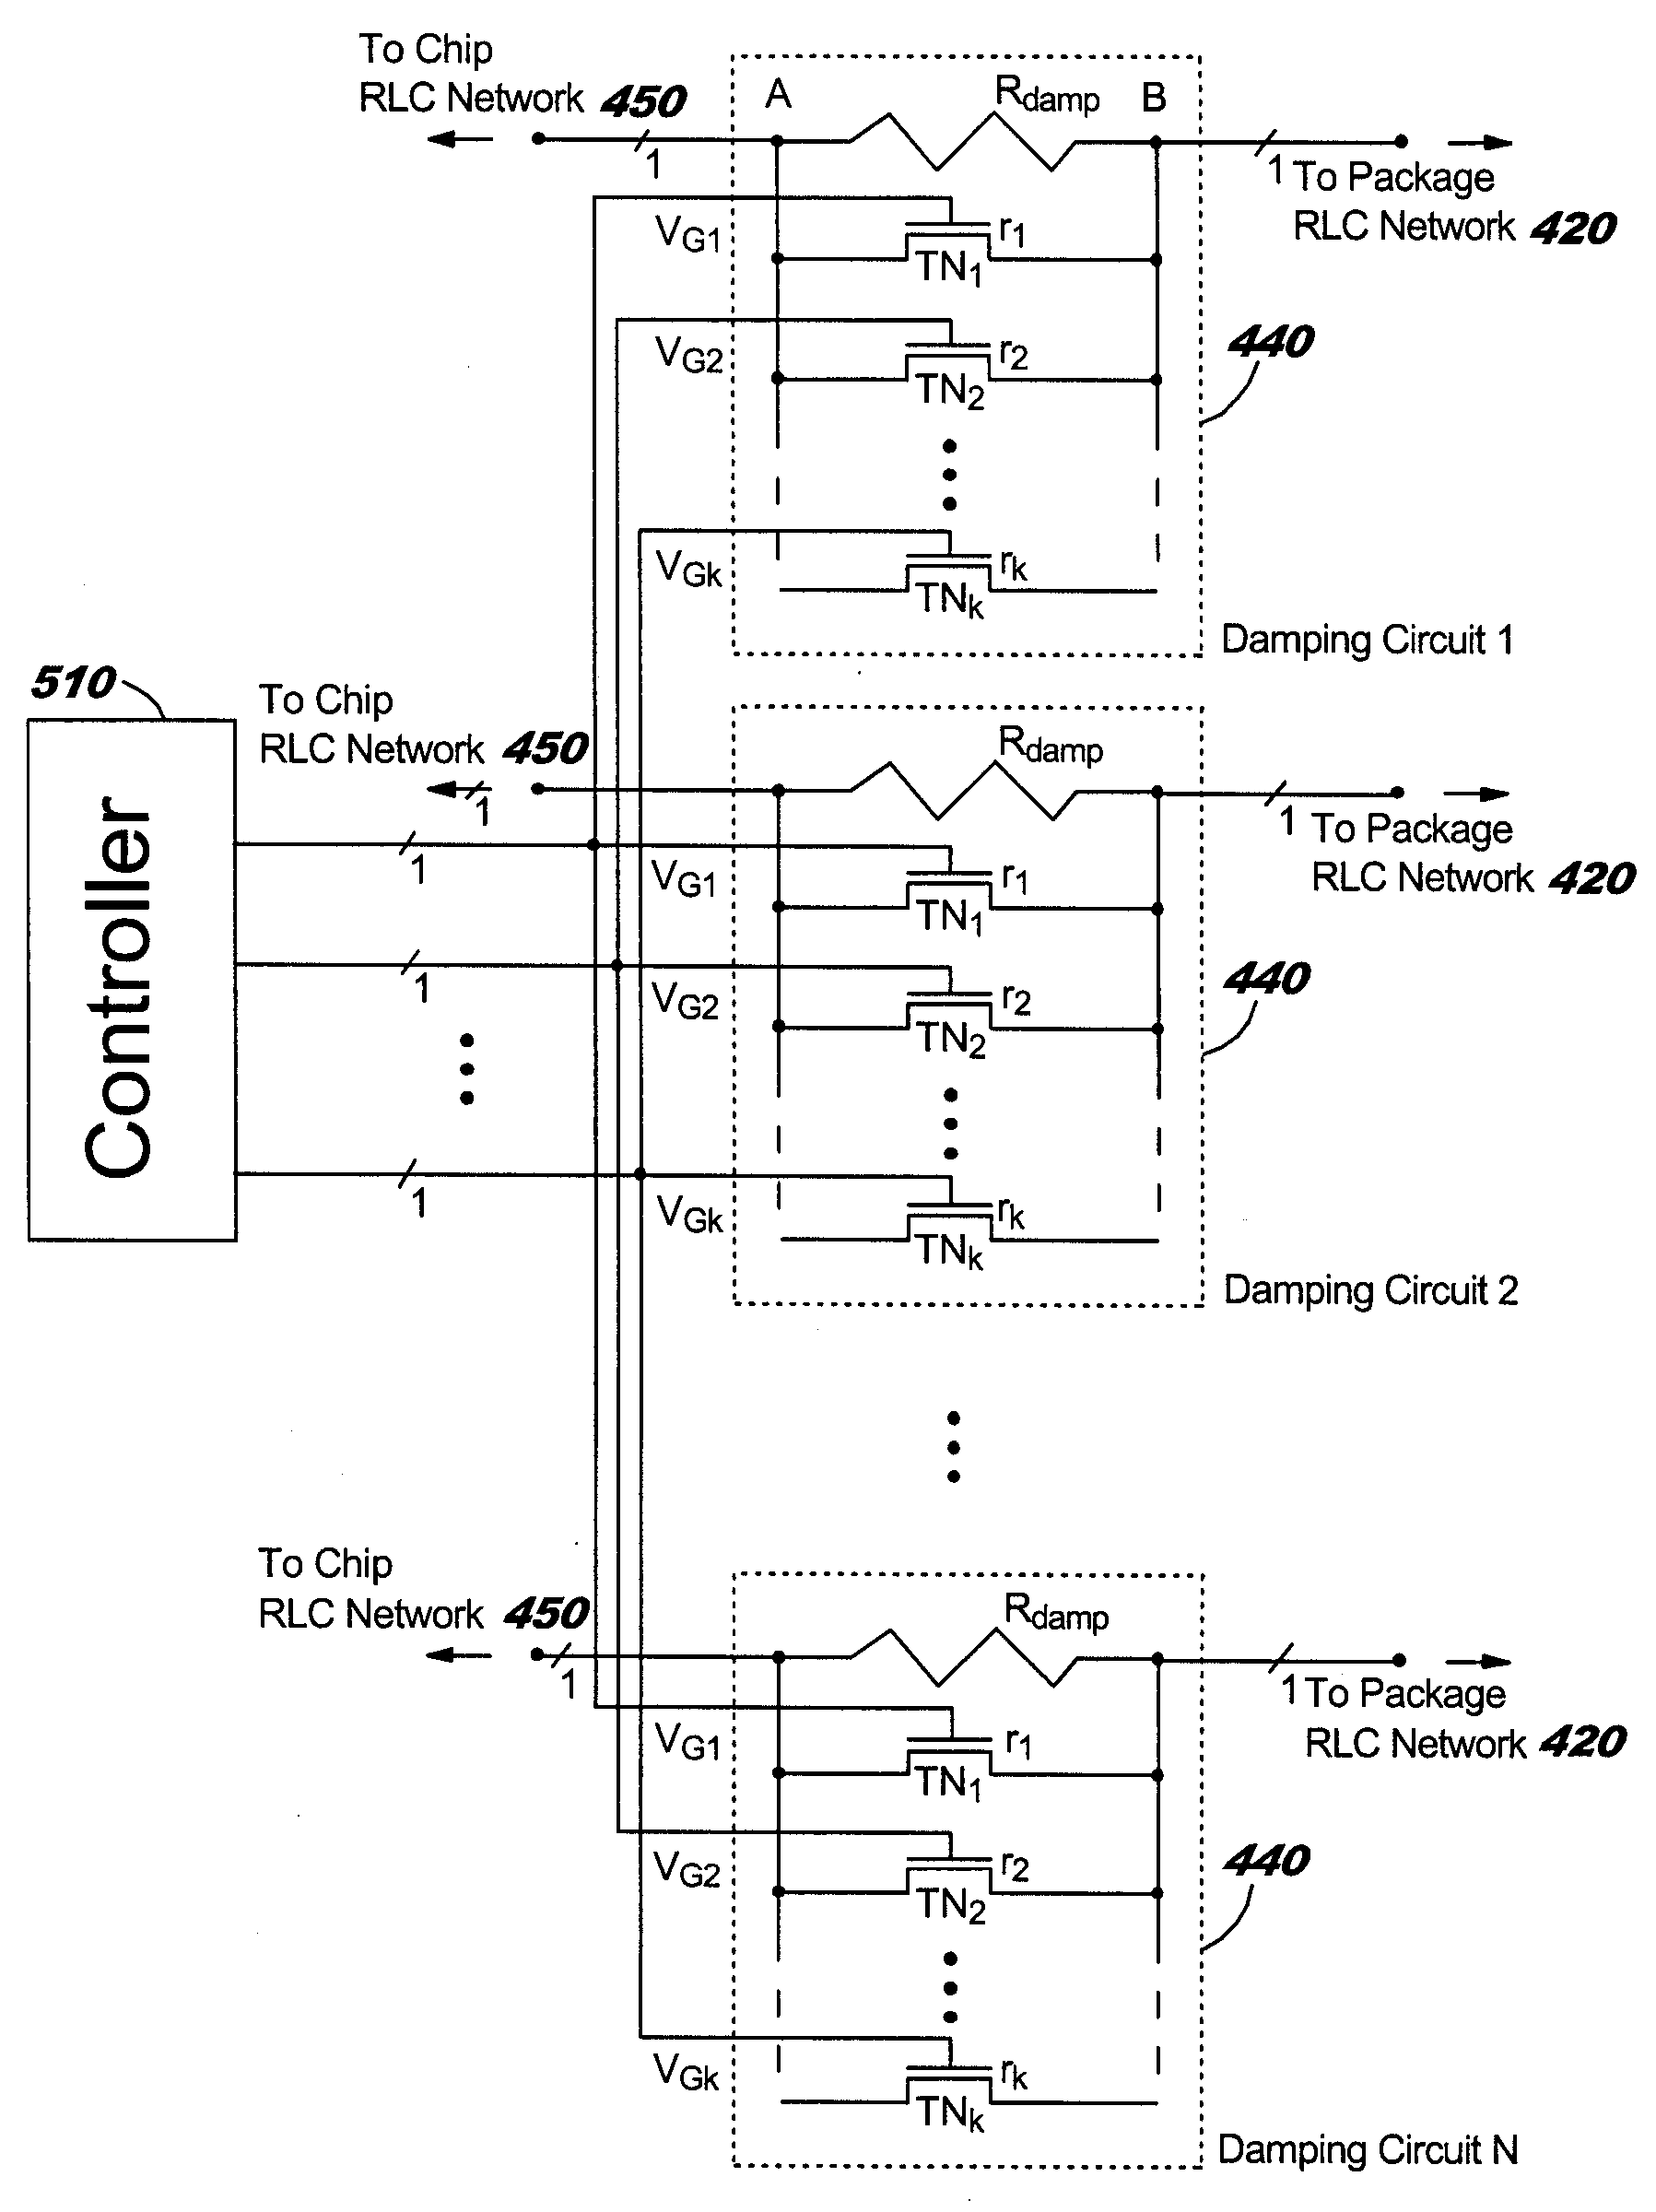 Damping of LC Ringing in IC (Integrated Circuit) Power Distribution Systems